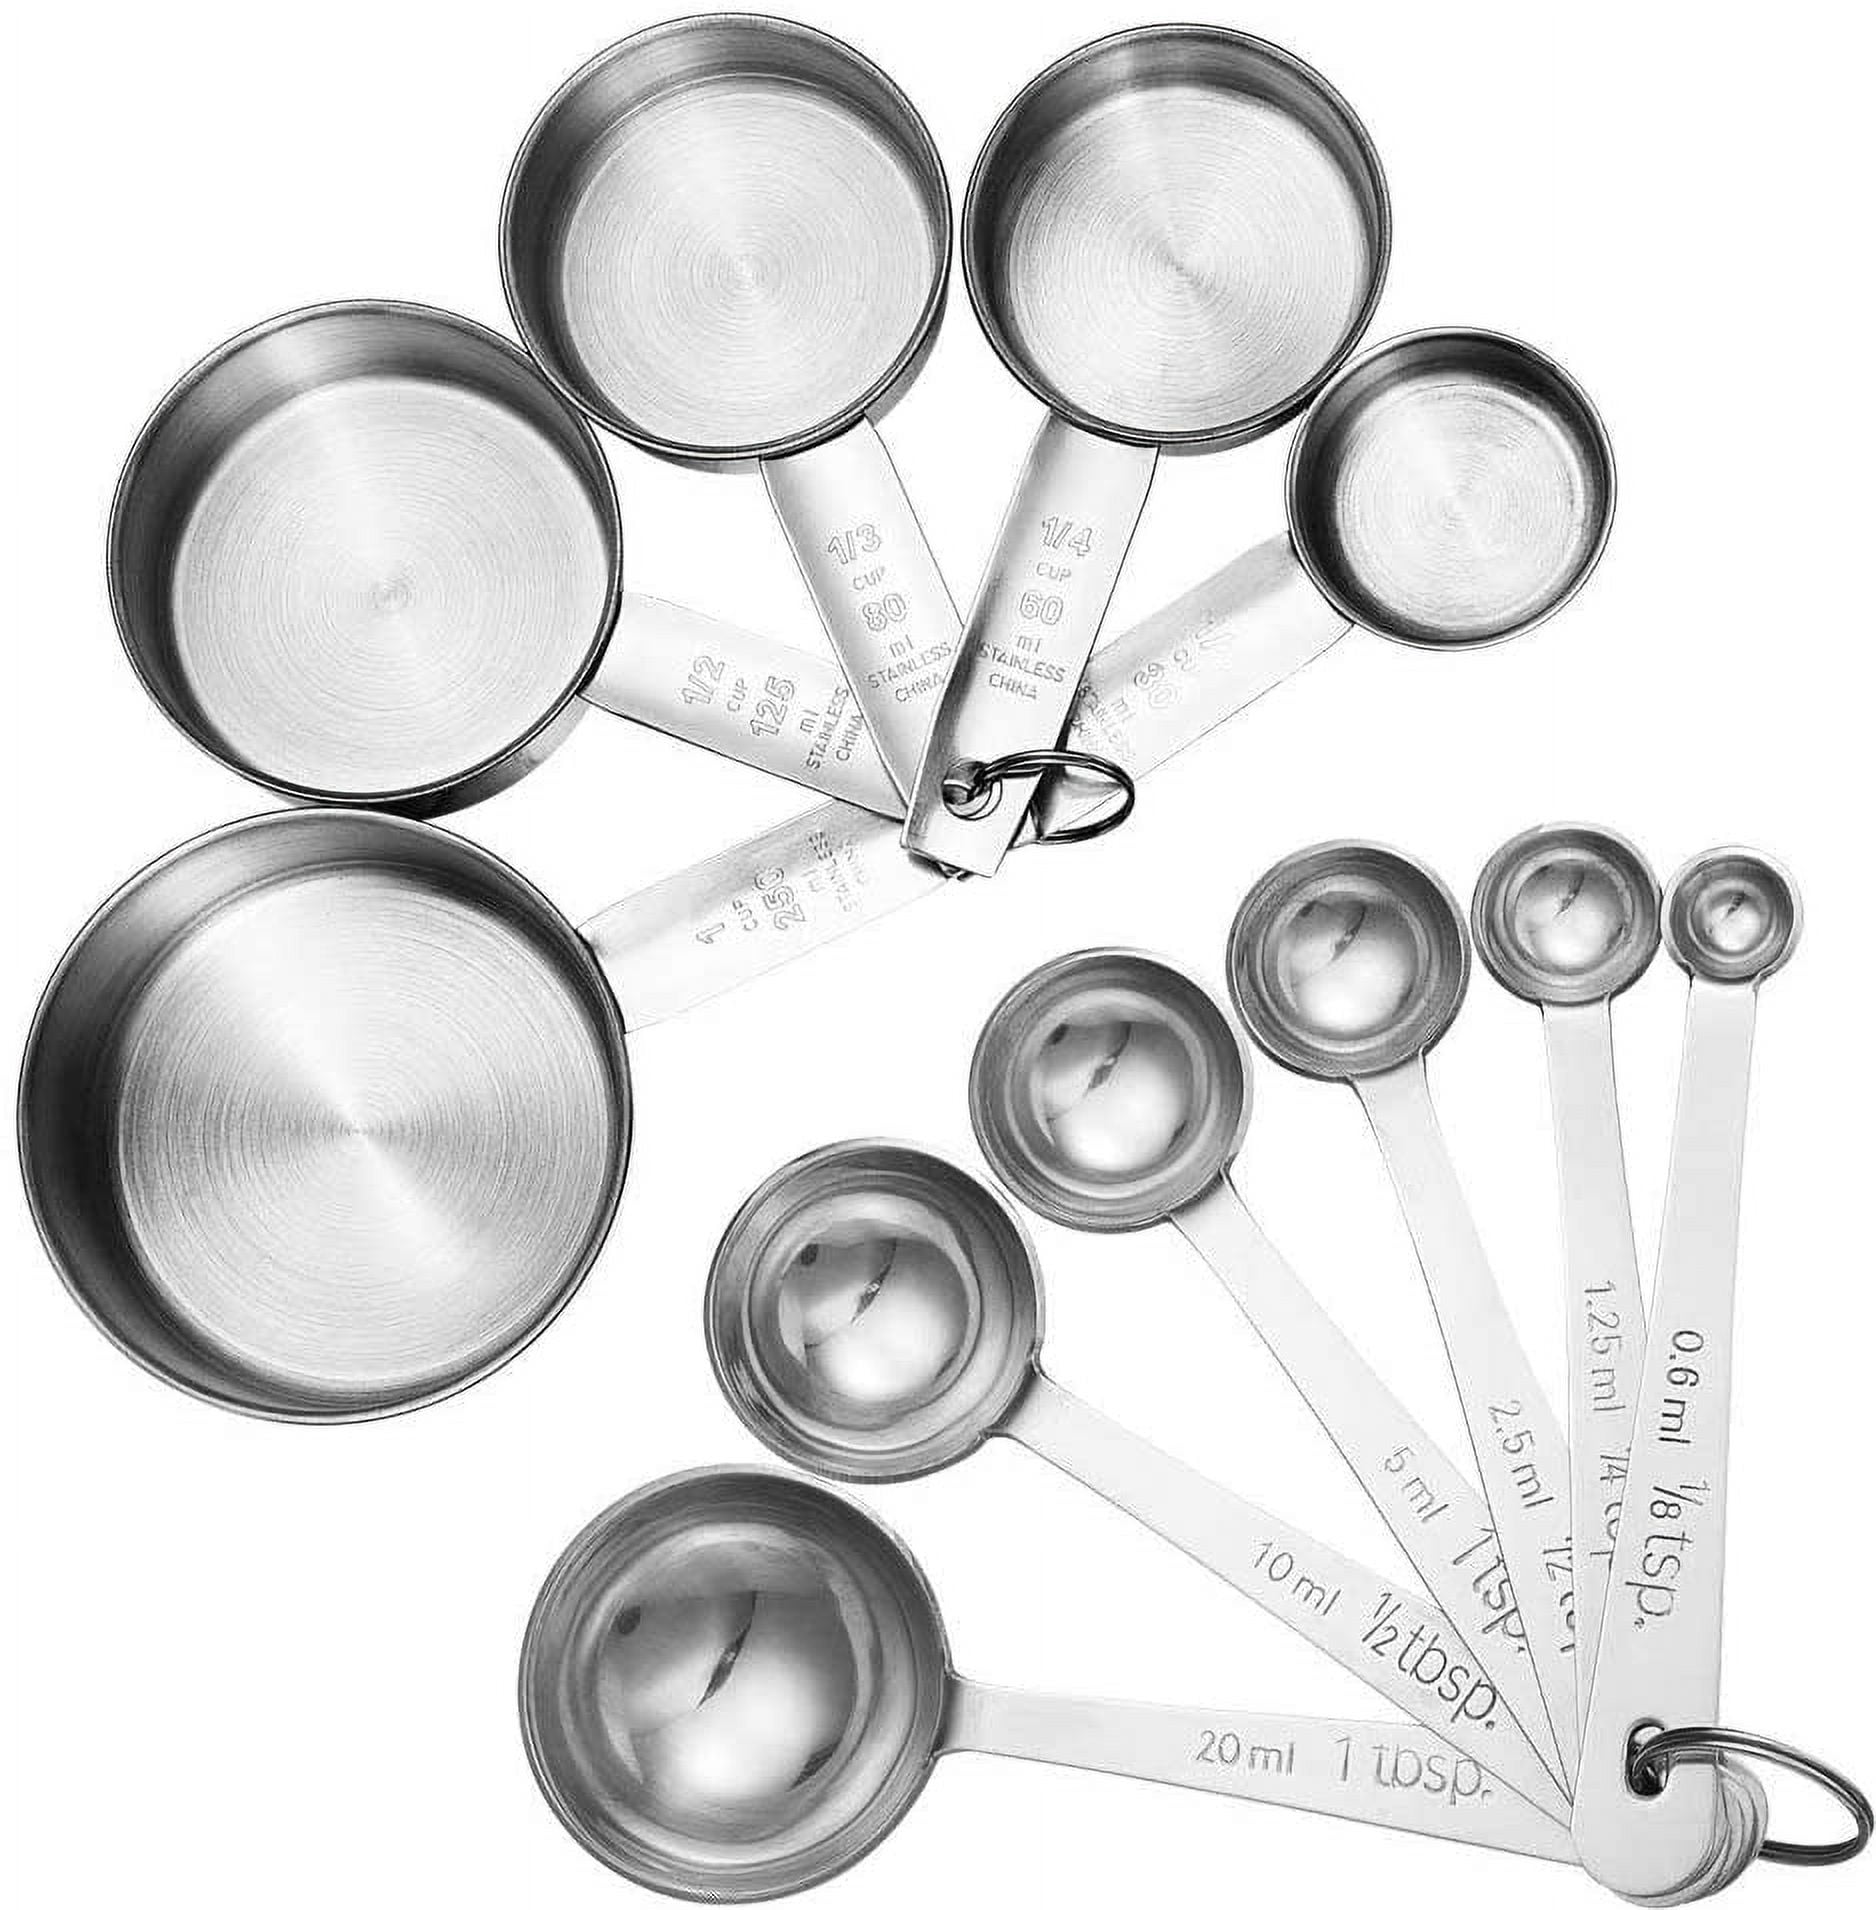 Plastic Measuring Cups and Spoons Set 14 Piece. Includes 11